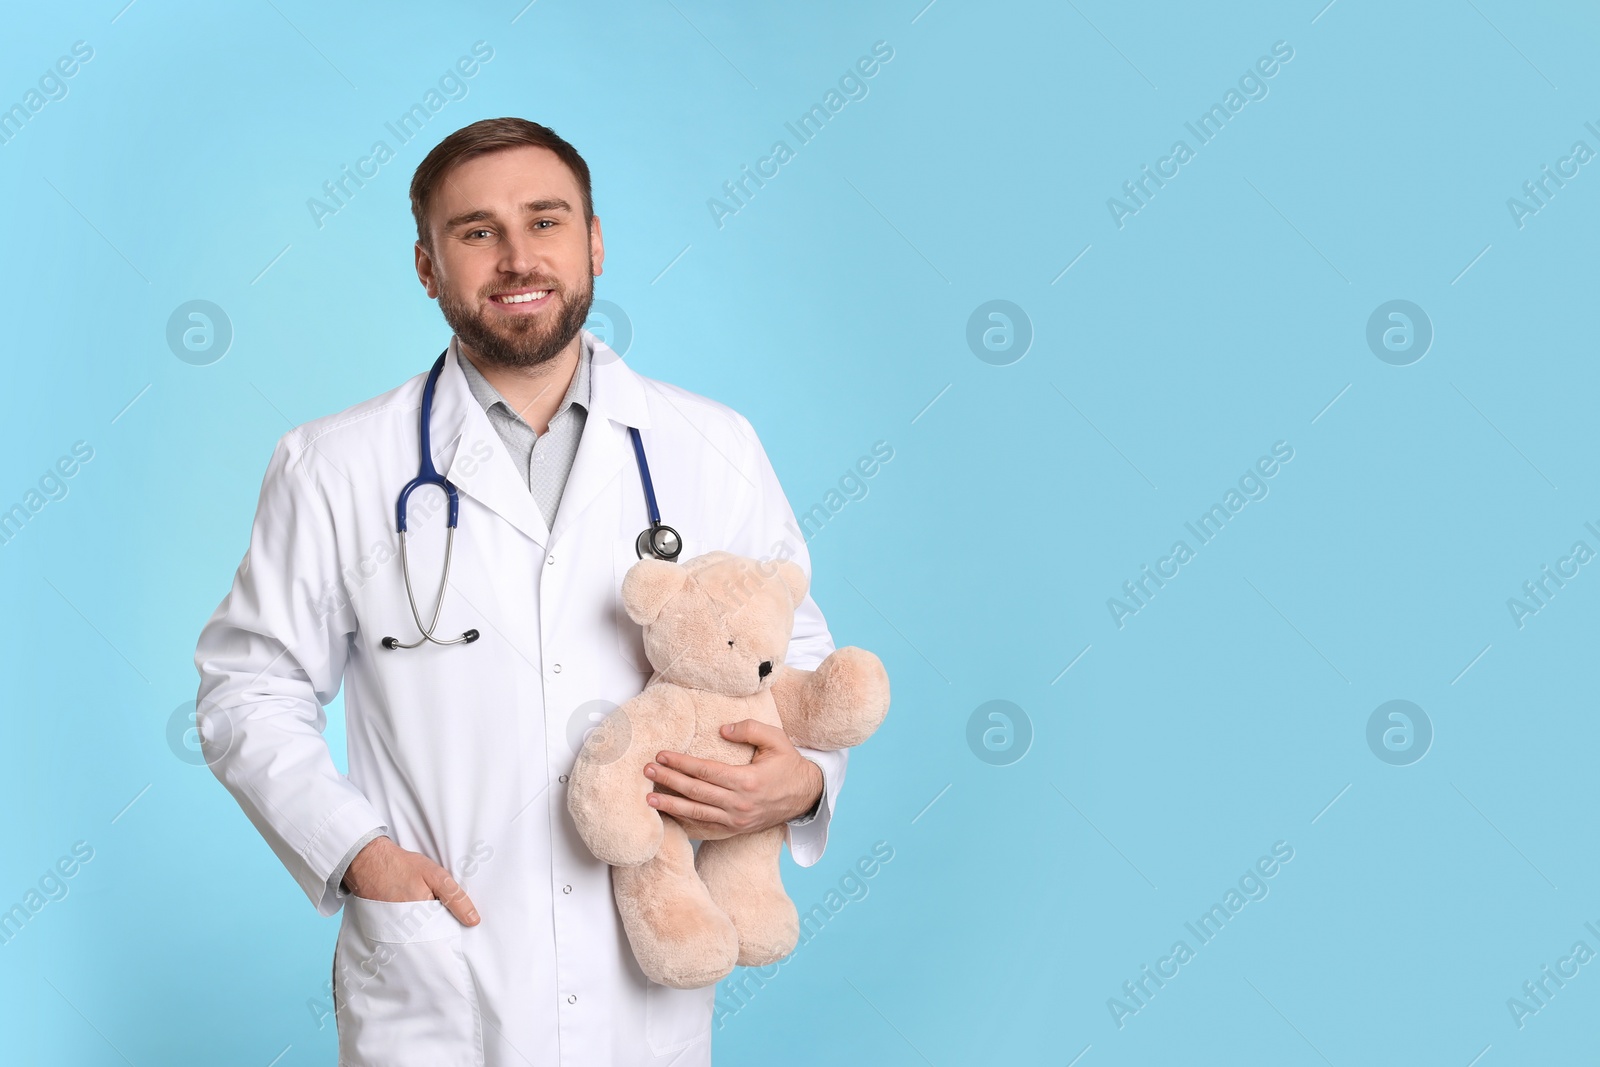 Photo of Pediatrician with teddy bear and stethoscope on light blue background, space for text